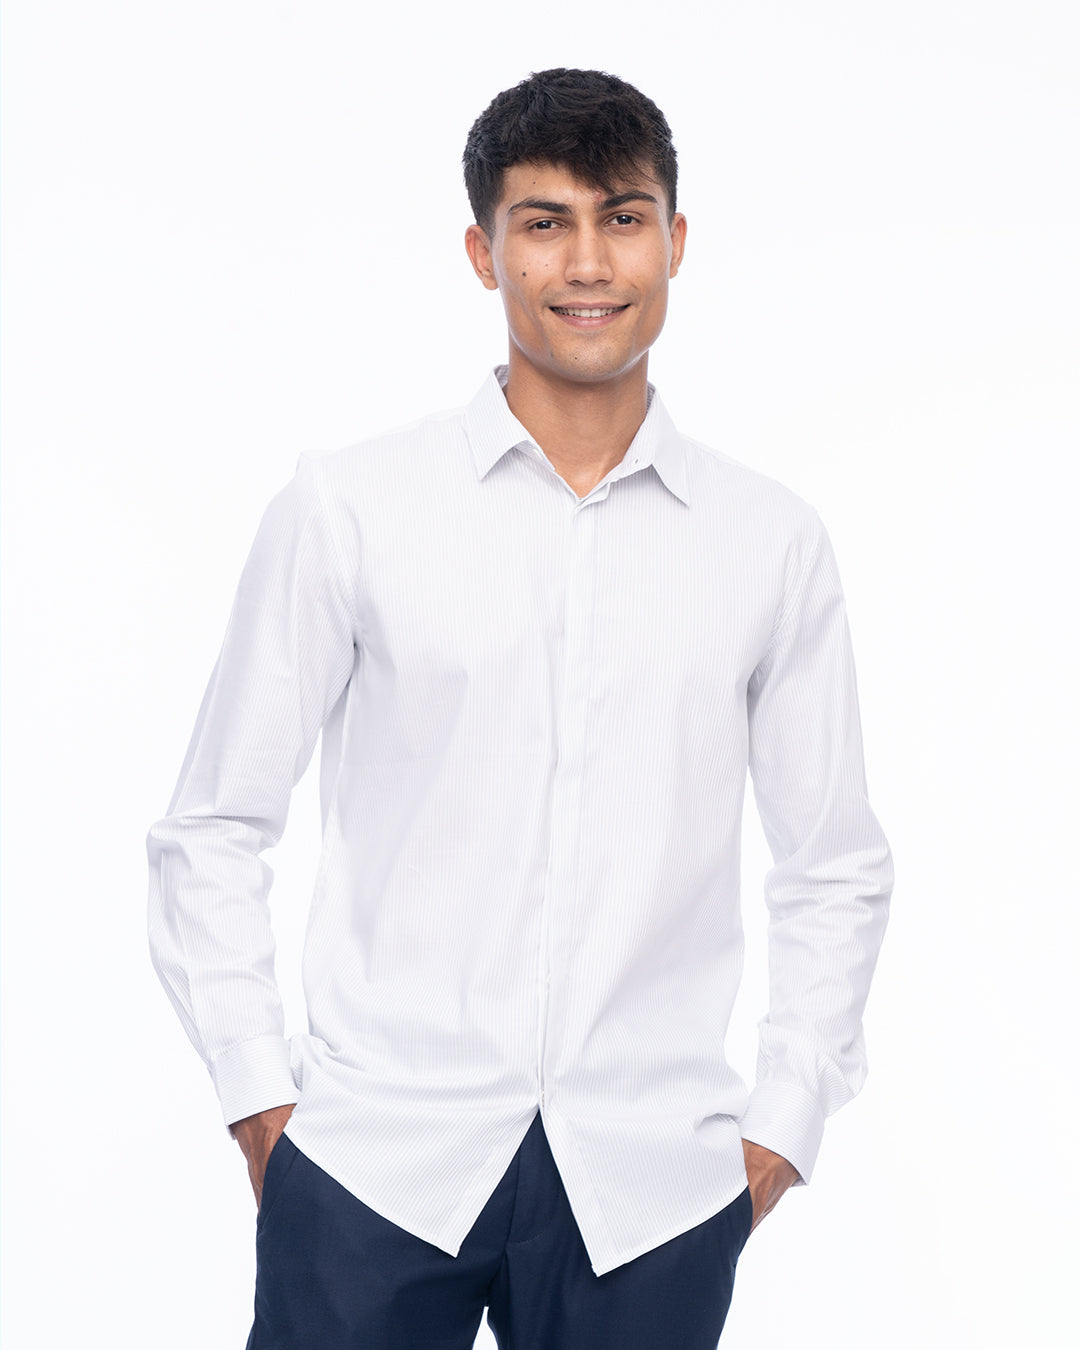 A young man stands against a plain white background, smiling and wearing a Sky Line - Classic Shirt made from premium cotton paired with dark pants. His hands are relaxed and resting in his pockets.